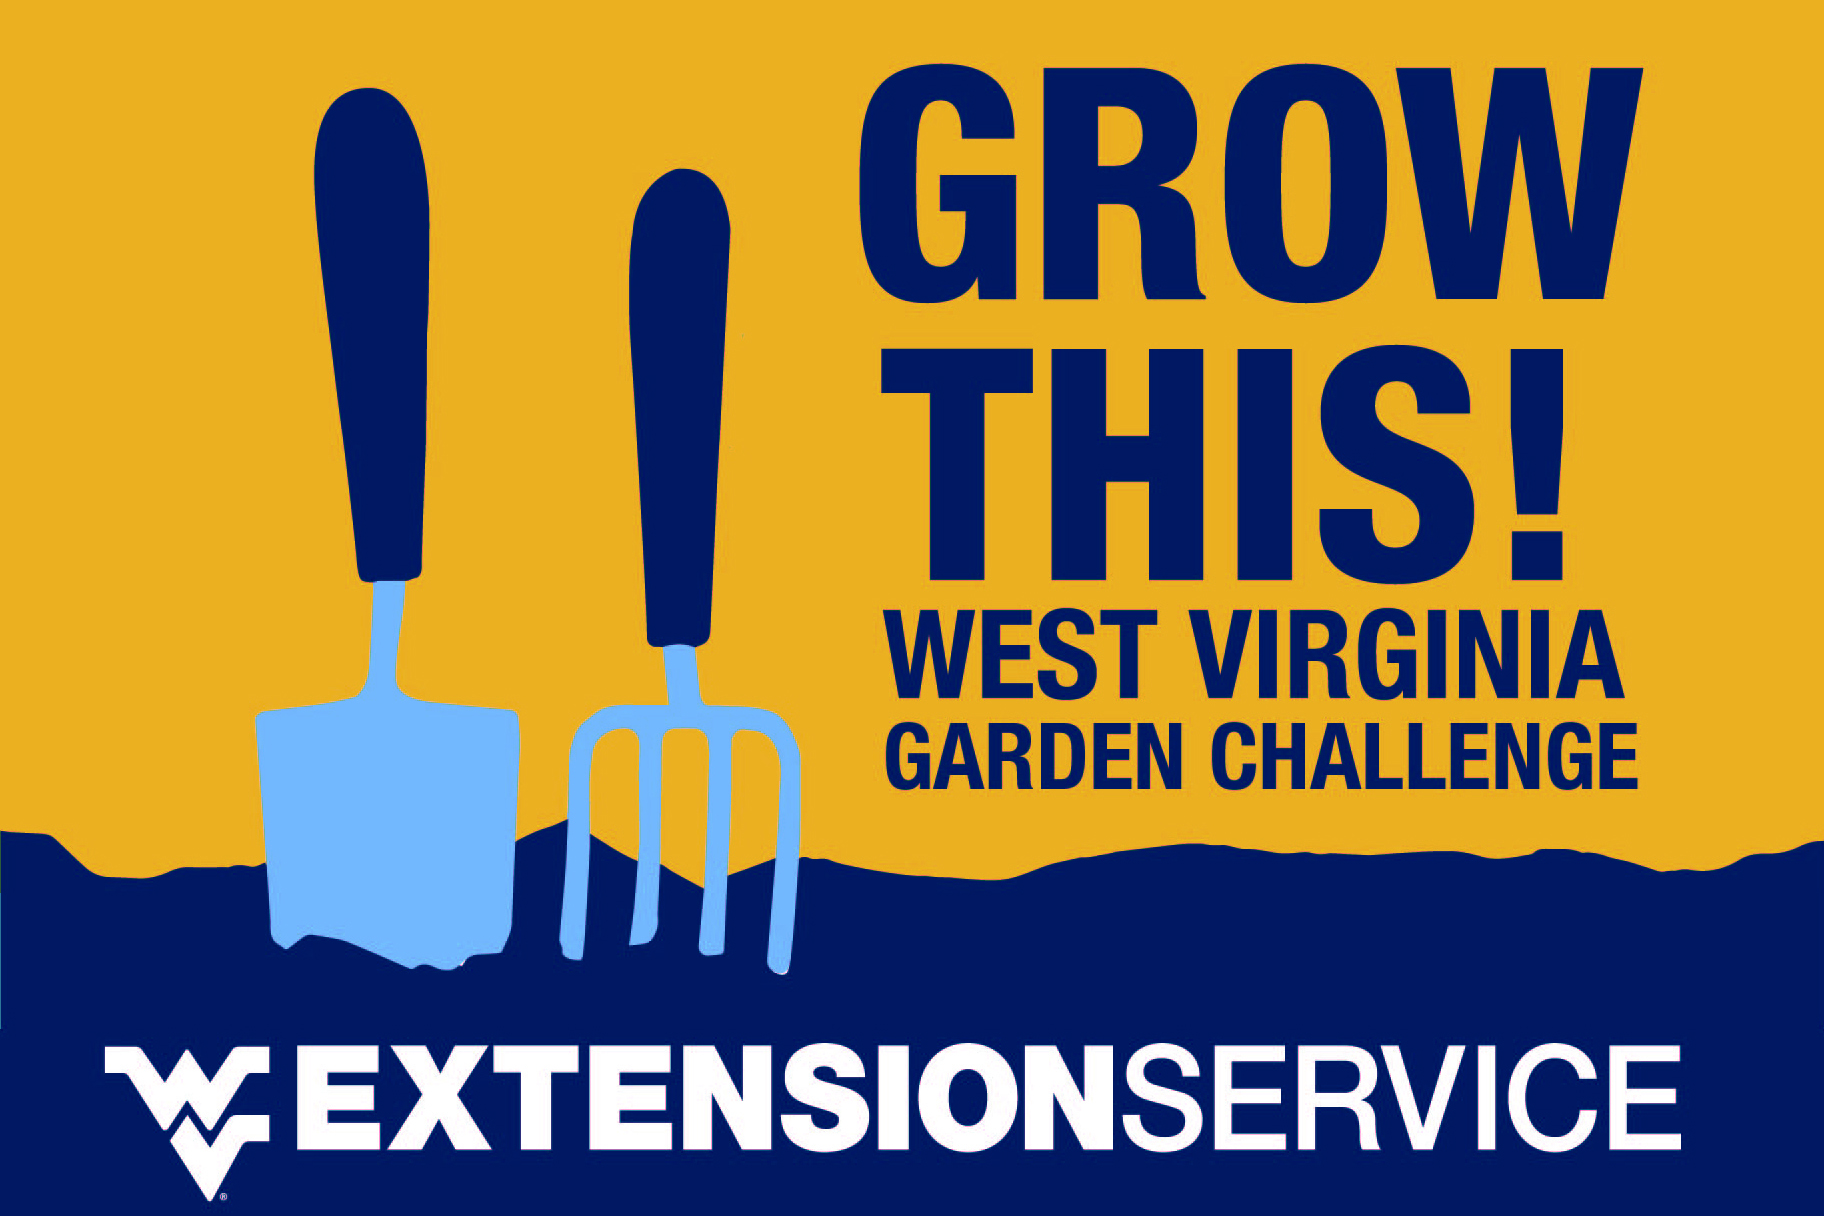 Interest grows in WVU Extension Service gardening program during COVID